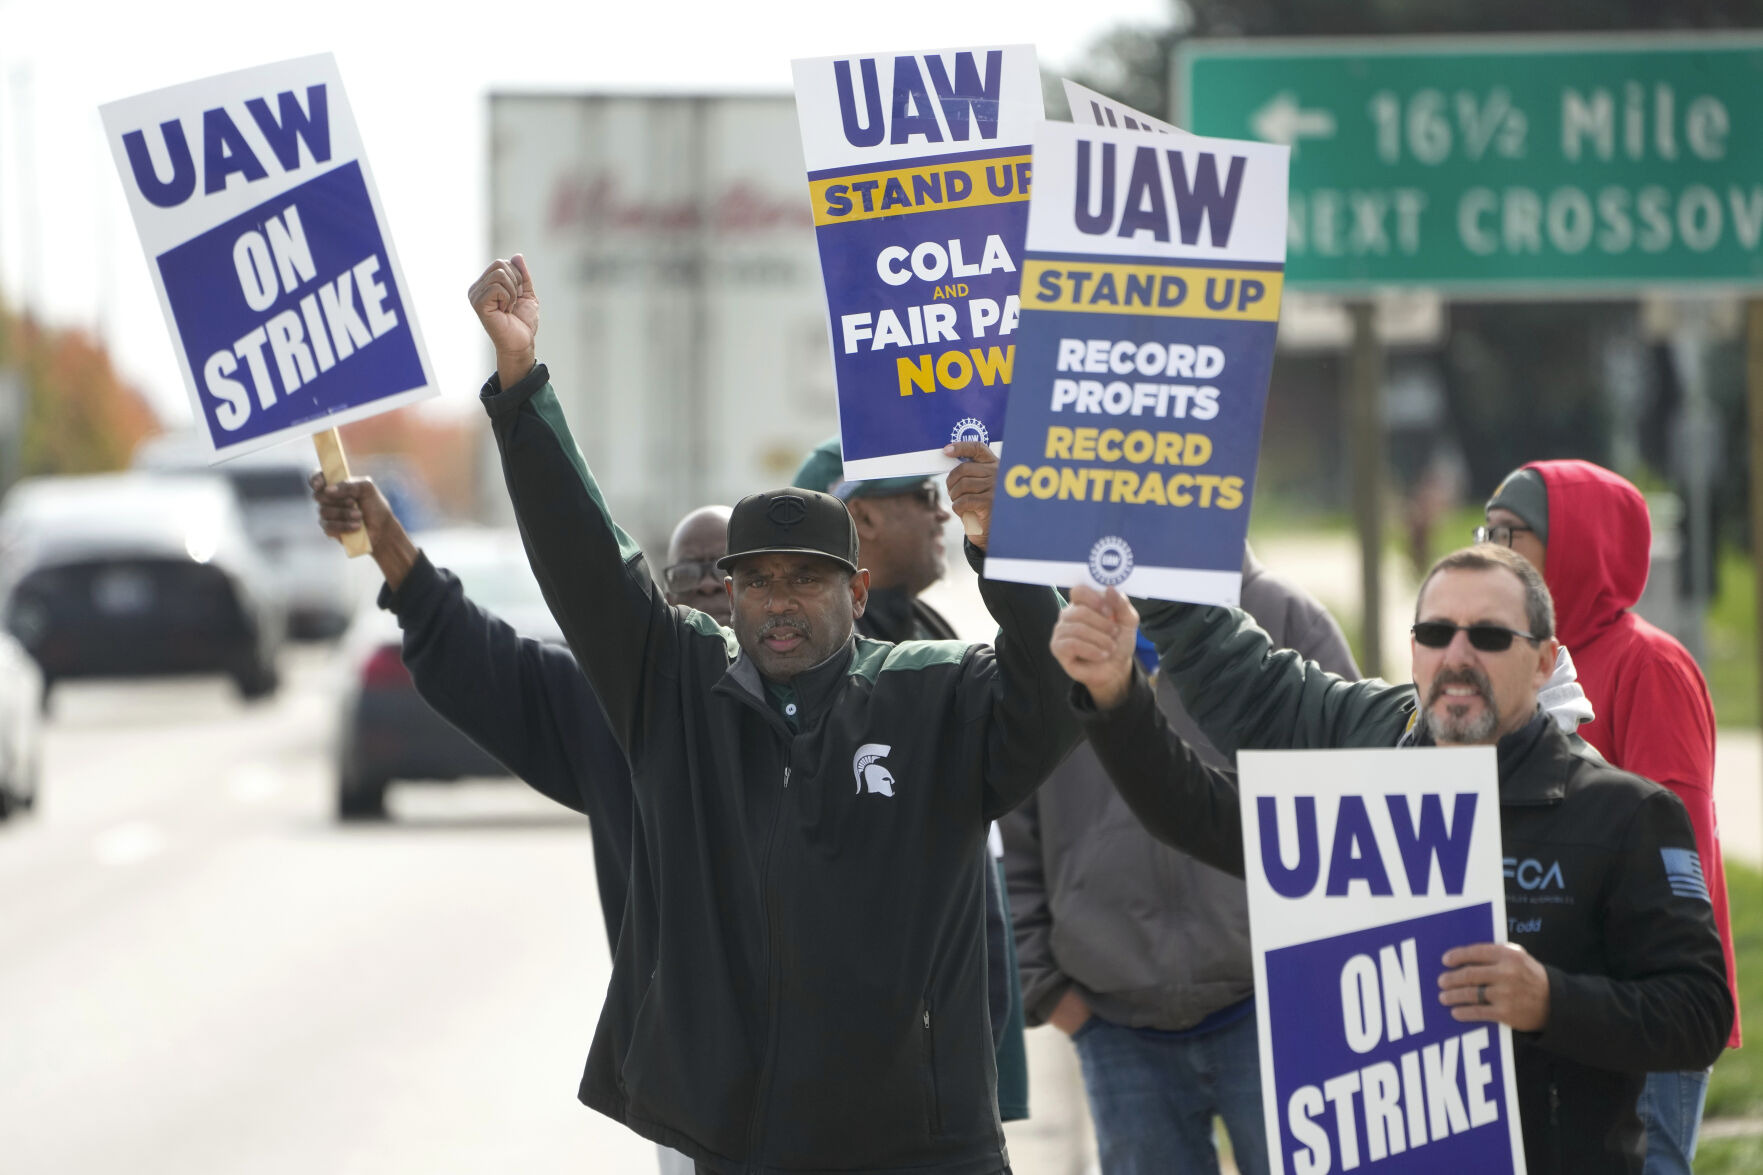 <p>FILE - United Auto Workers members walk the picket line during a strike at the Stellantis Sterling Heights Assembly Plant, in Sterling Heights, Mich., Monday, Oct. 23, 2023. A six-week United Auto Workers strike at Ford cut sales by about 100,000 vehicles and cost the company $1.7 billion in lost profits this year, Ford said Thursday, Nov. 30, 2023. (AP Photo/Paul Sancya, File)</p>   PHOTO CREDIT: Paul Sancya 